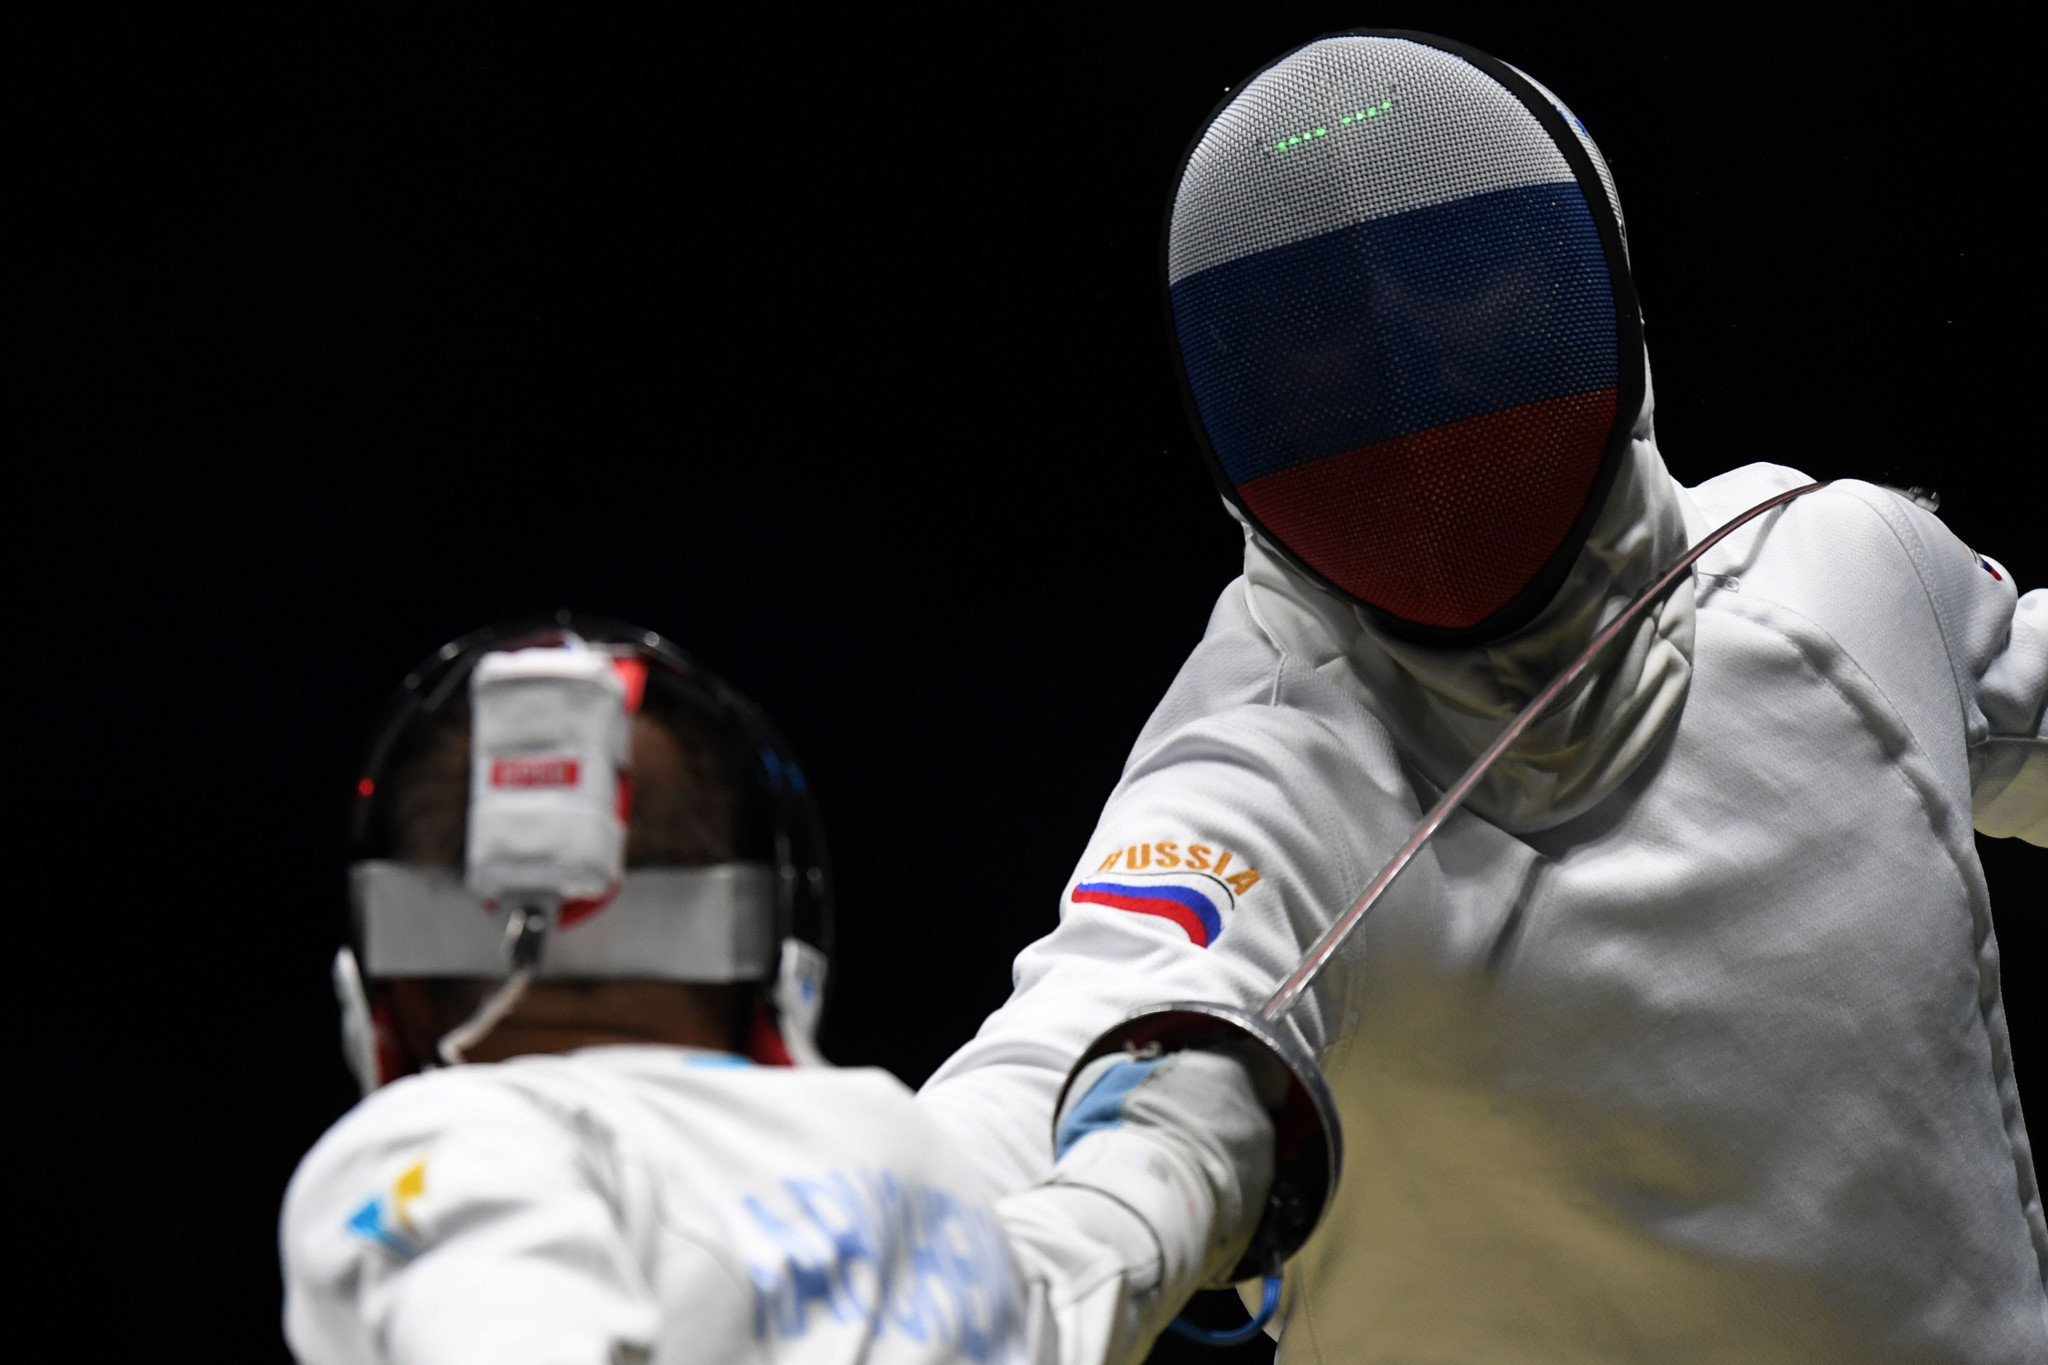 Russian and Belarusian fencers are set to return to FIE events from mid-April, but travel restrictions remain in several European countries ©Getty Images